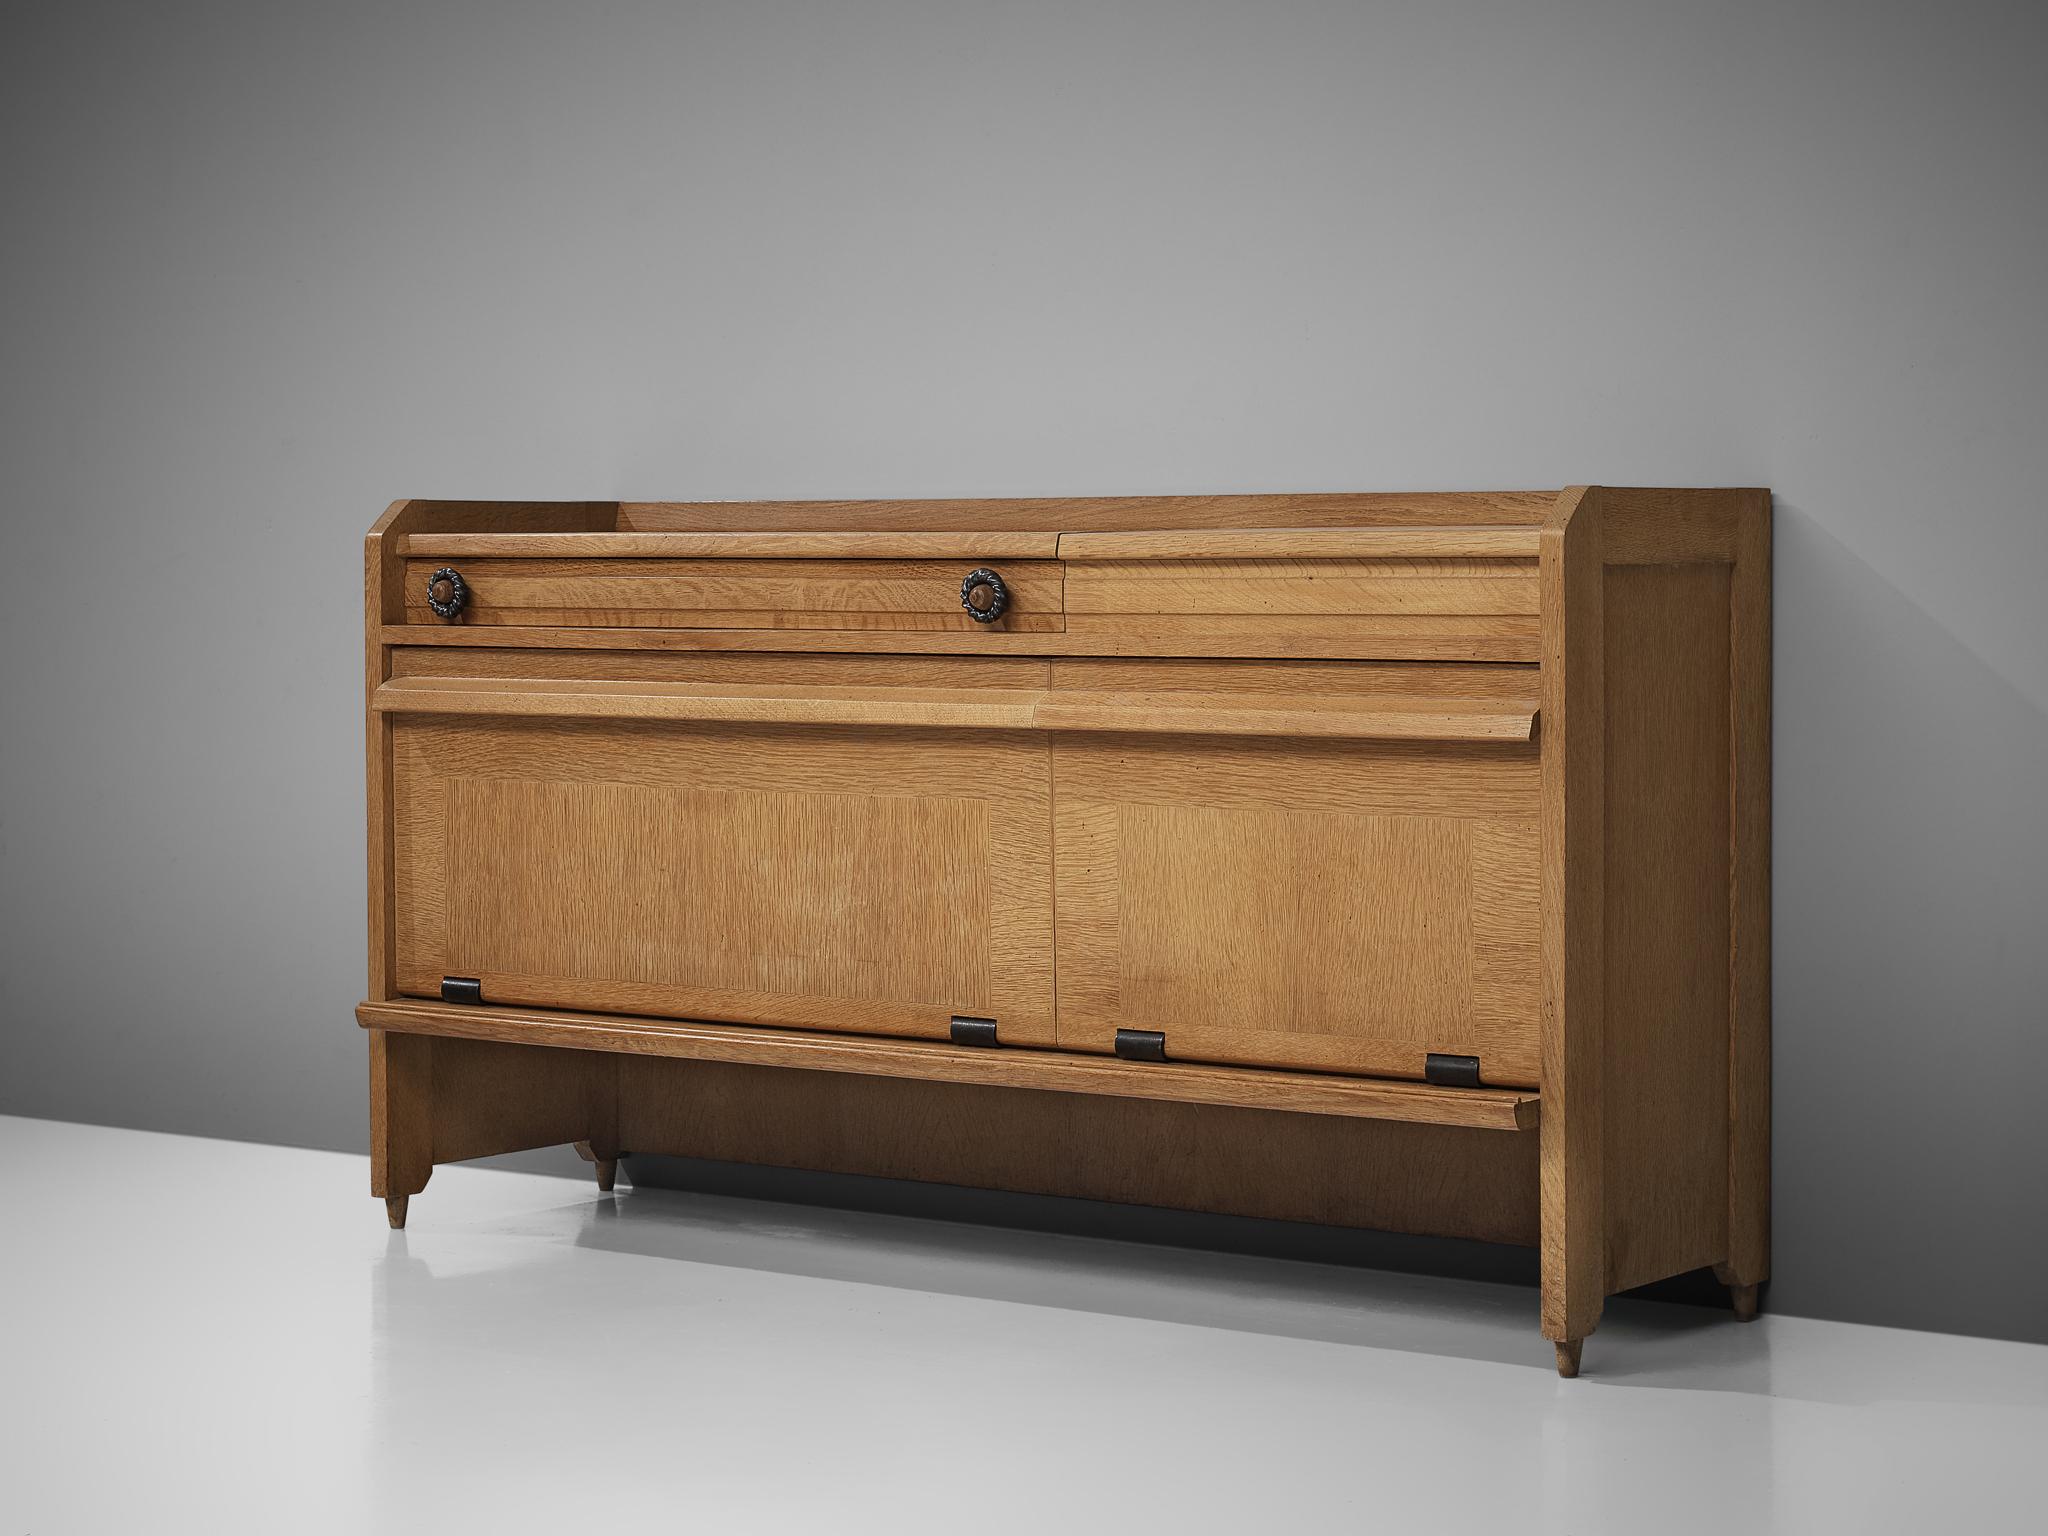 Credenza, in oak and ceramic, by Robert Guillerme et Jacques Chambron for Votre Maison, France, 1960s.

Cabinet by French designer duo Guillerme and Chambron. Characterized by the oak wood inlay patterns and ceramic decorations. The high and